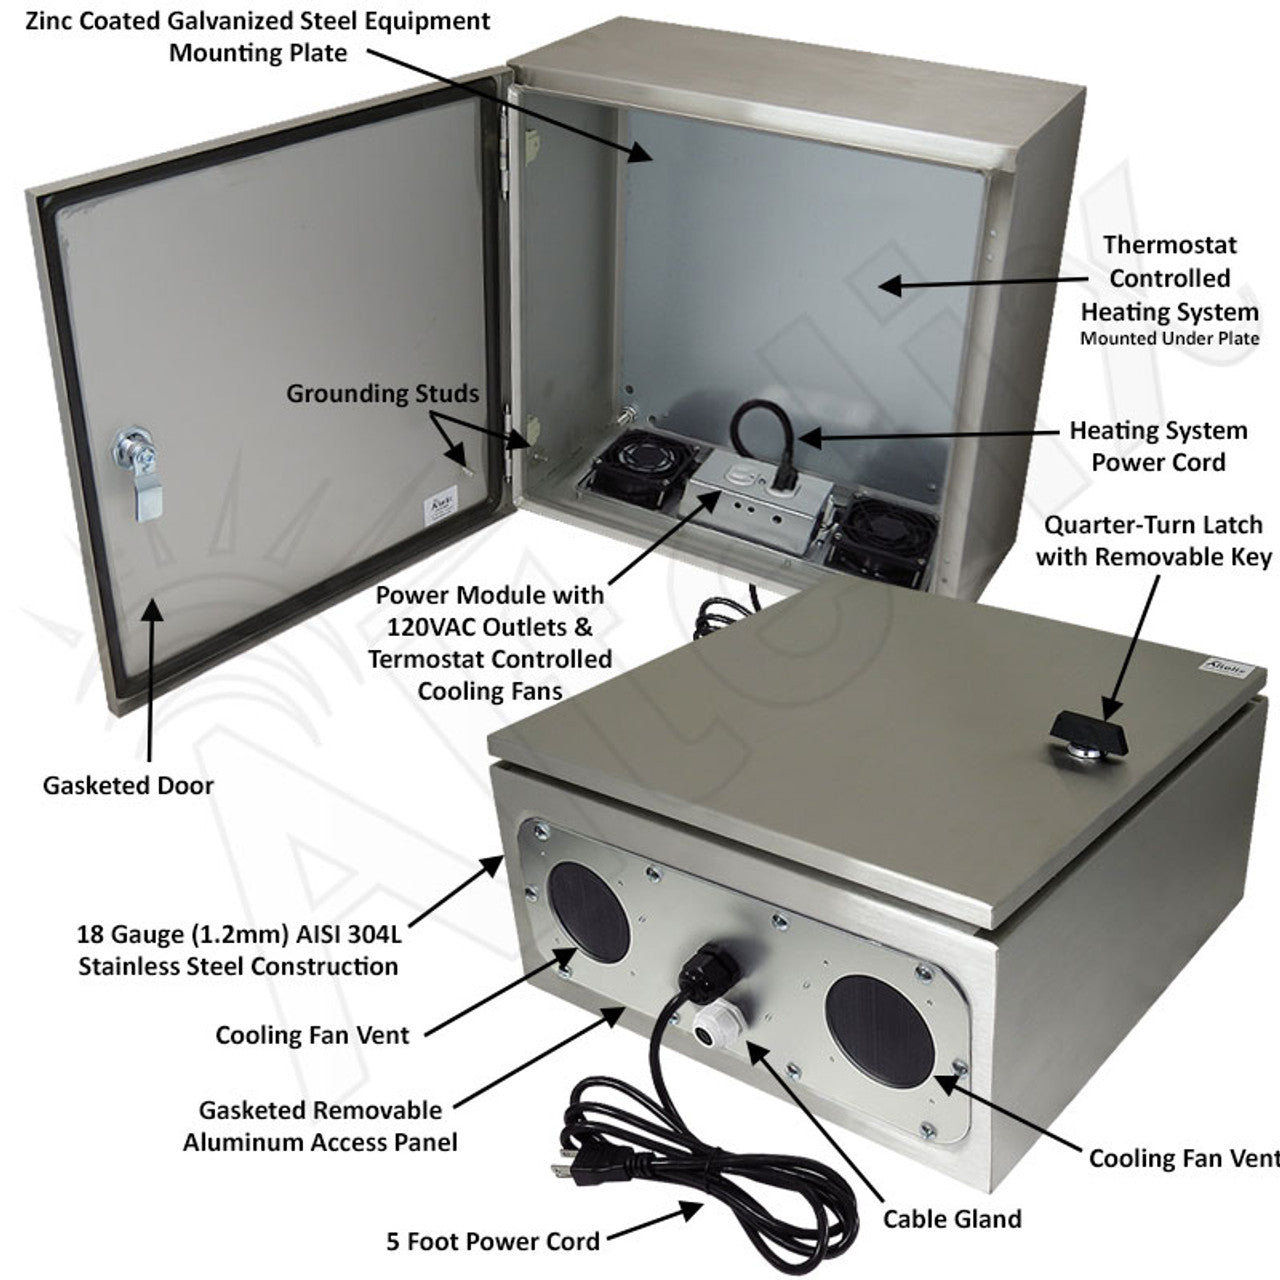 Altelix Stainless Steel Heated Weatherproof NEMA Enclosure with Dual Cooling Fans, 200W Heater, 120 VAC Outlets and Power Cord-2